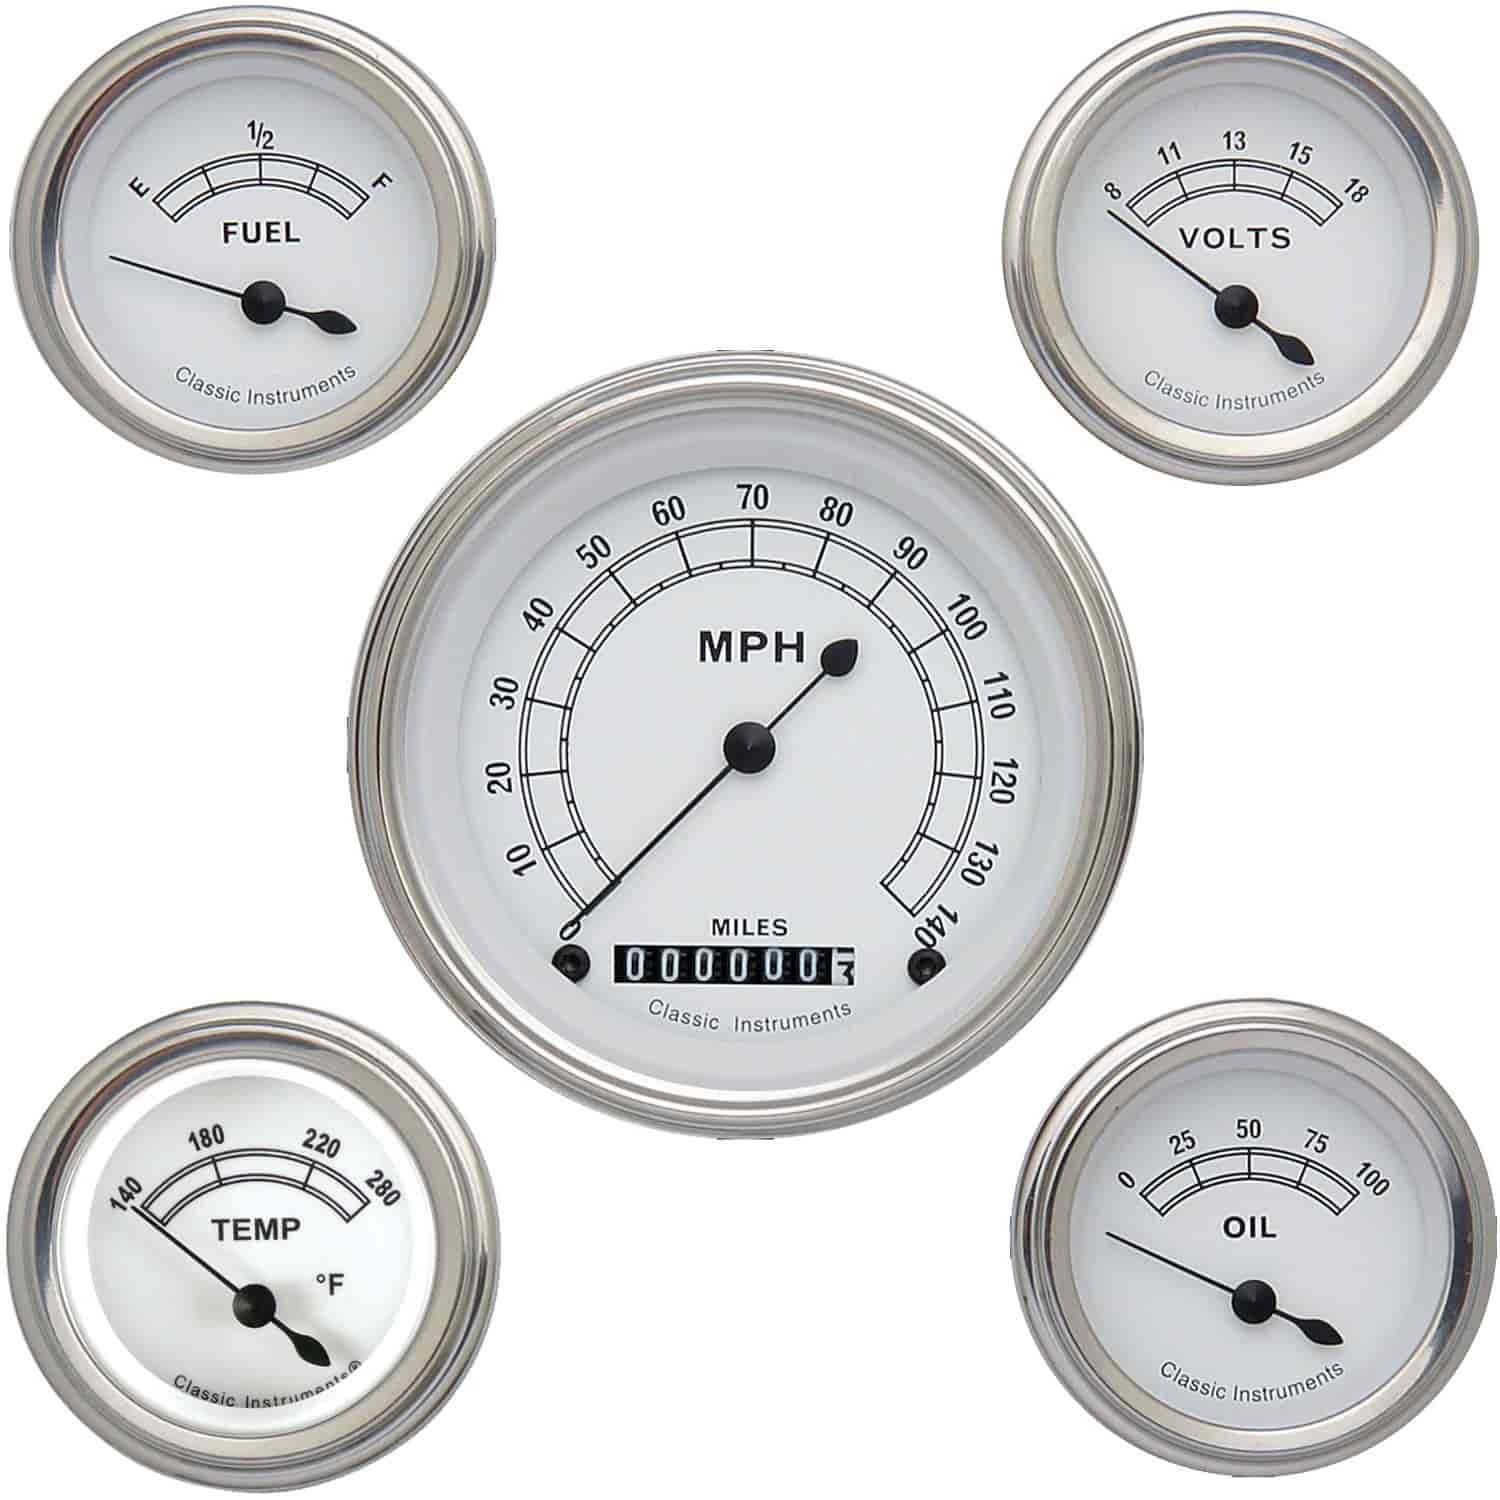 Classic White Series 5-Gauge Set 3-3/8" Electrical Speedometer (140 mph)